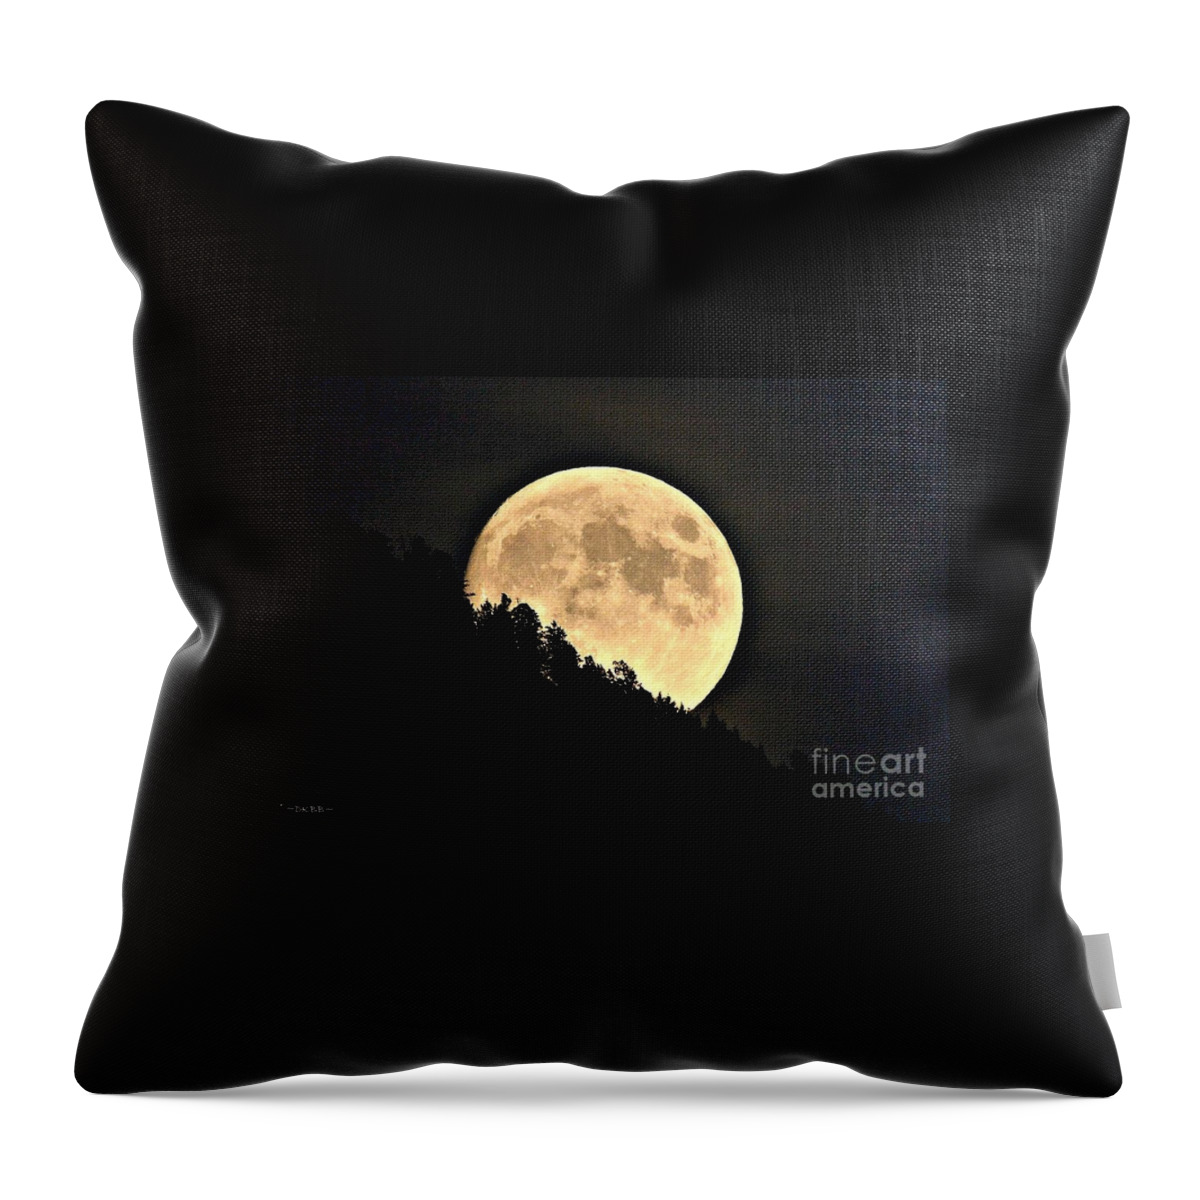 Moon Throw Pillow featuring the photograph Moonrise by Dorrene BrownButterfield